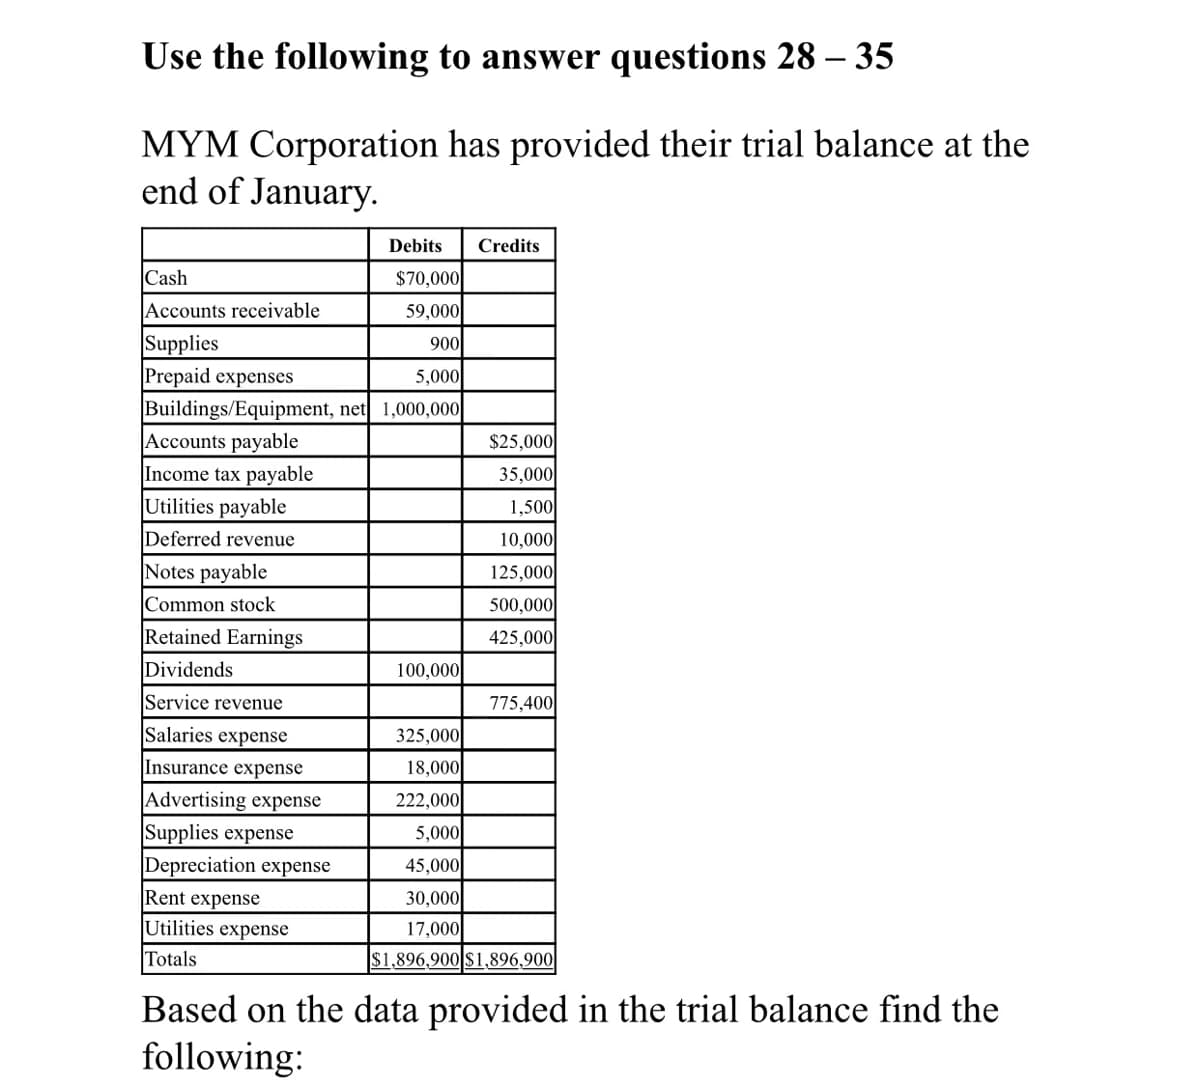 Use the following to answer questions 28 – 35
MYM Corporation has provided their trial balance at the
end of January.
Debits
Credits
Cash
$70,000
Accounts receivable
59,000
Supplies
Prepaid expenses
Buildings/Equipment, net 1,000,000
900
5,000
Accounts payable
$25,000
Income tax payable
Utilities payable
35,000
1,500
Deferred revenue
10,000
Notes payable
125,000
Common stock
500,000
Retained Earnings
425,000
Dividends
100,000
Service revenue
775,400
Salaries expense
325,000
Insurance expense
18,000
Advertising expense
Supplies expense
Depreciation expense
222,000
5,000|
45,000
Rent expense
30,000
Utilities expense
17,000
Totals
$1,896,900 S1,896,900
Based on the data provided in the trial balance find the
following:
